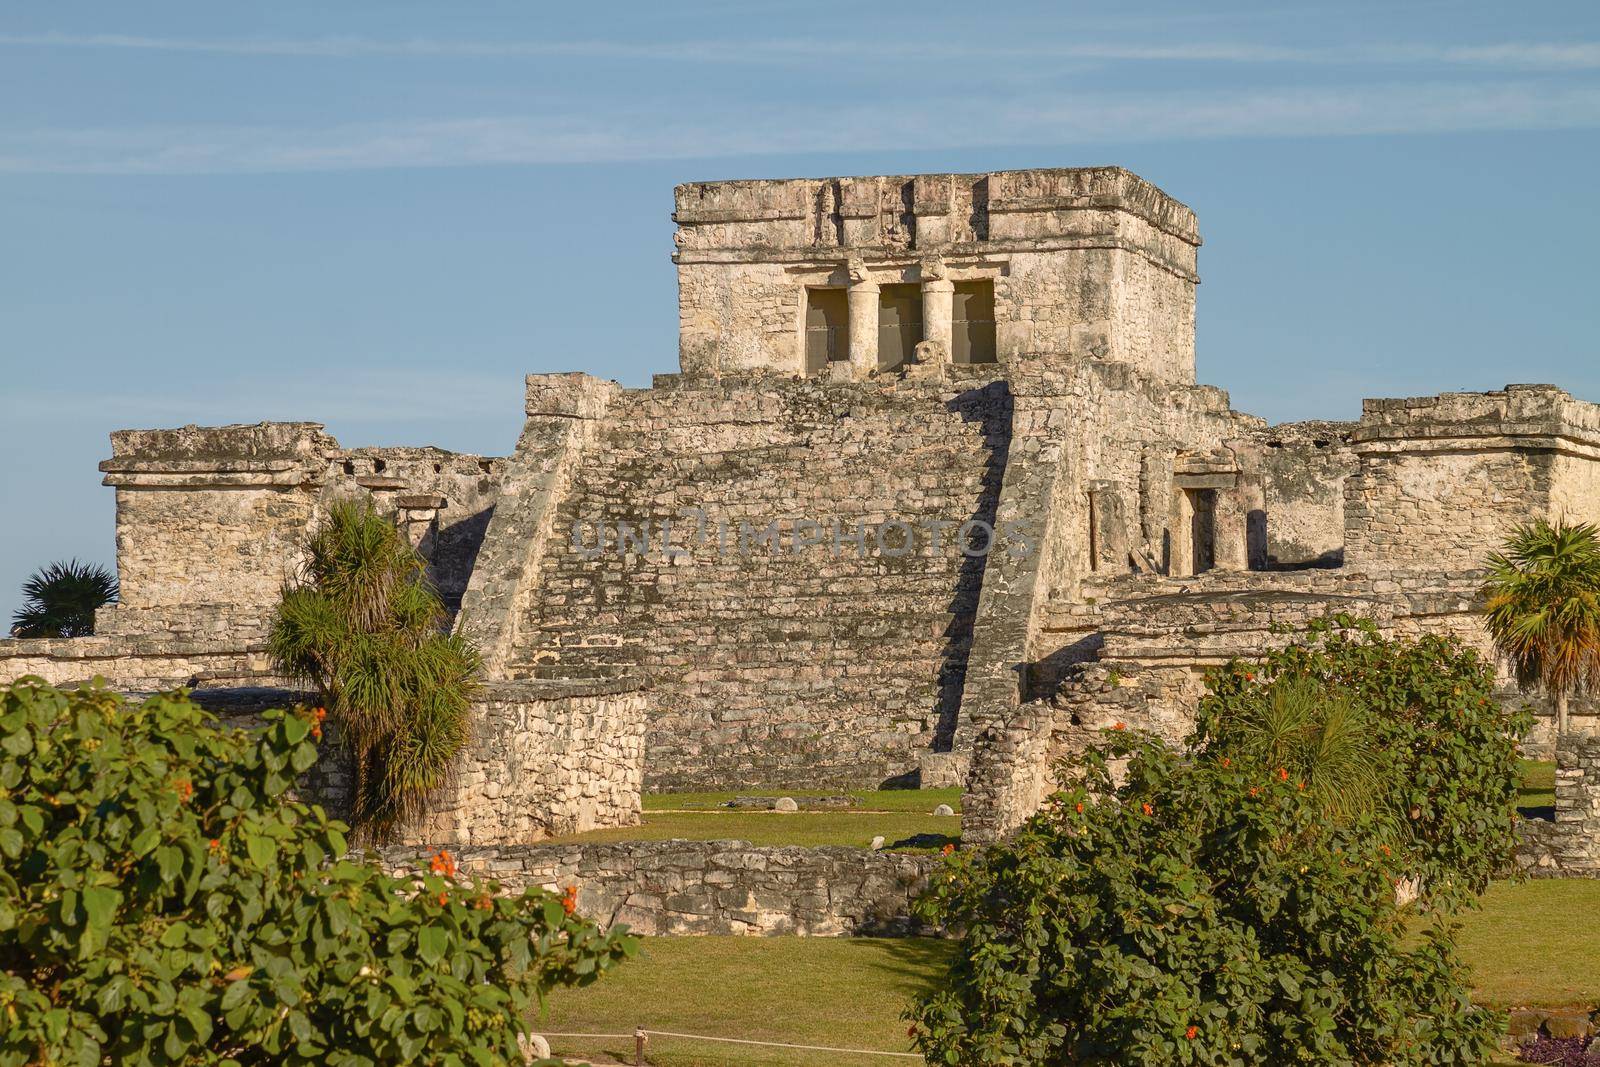 Mayan Ruins of Temple in Tulum Mexico by wondry